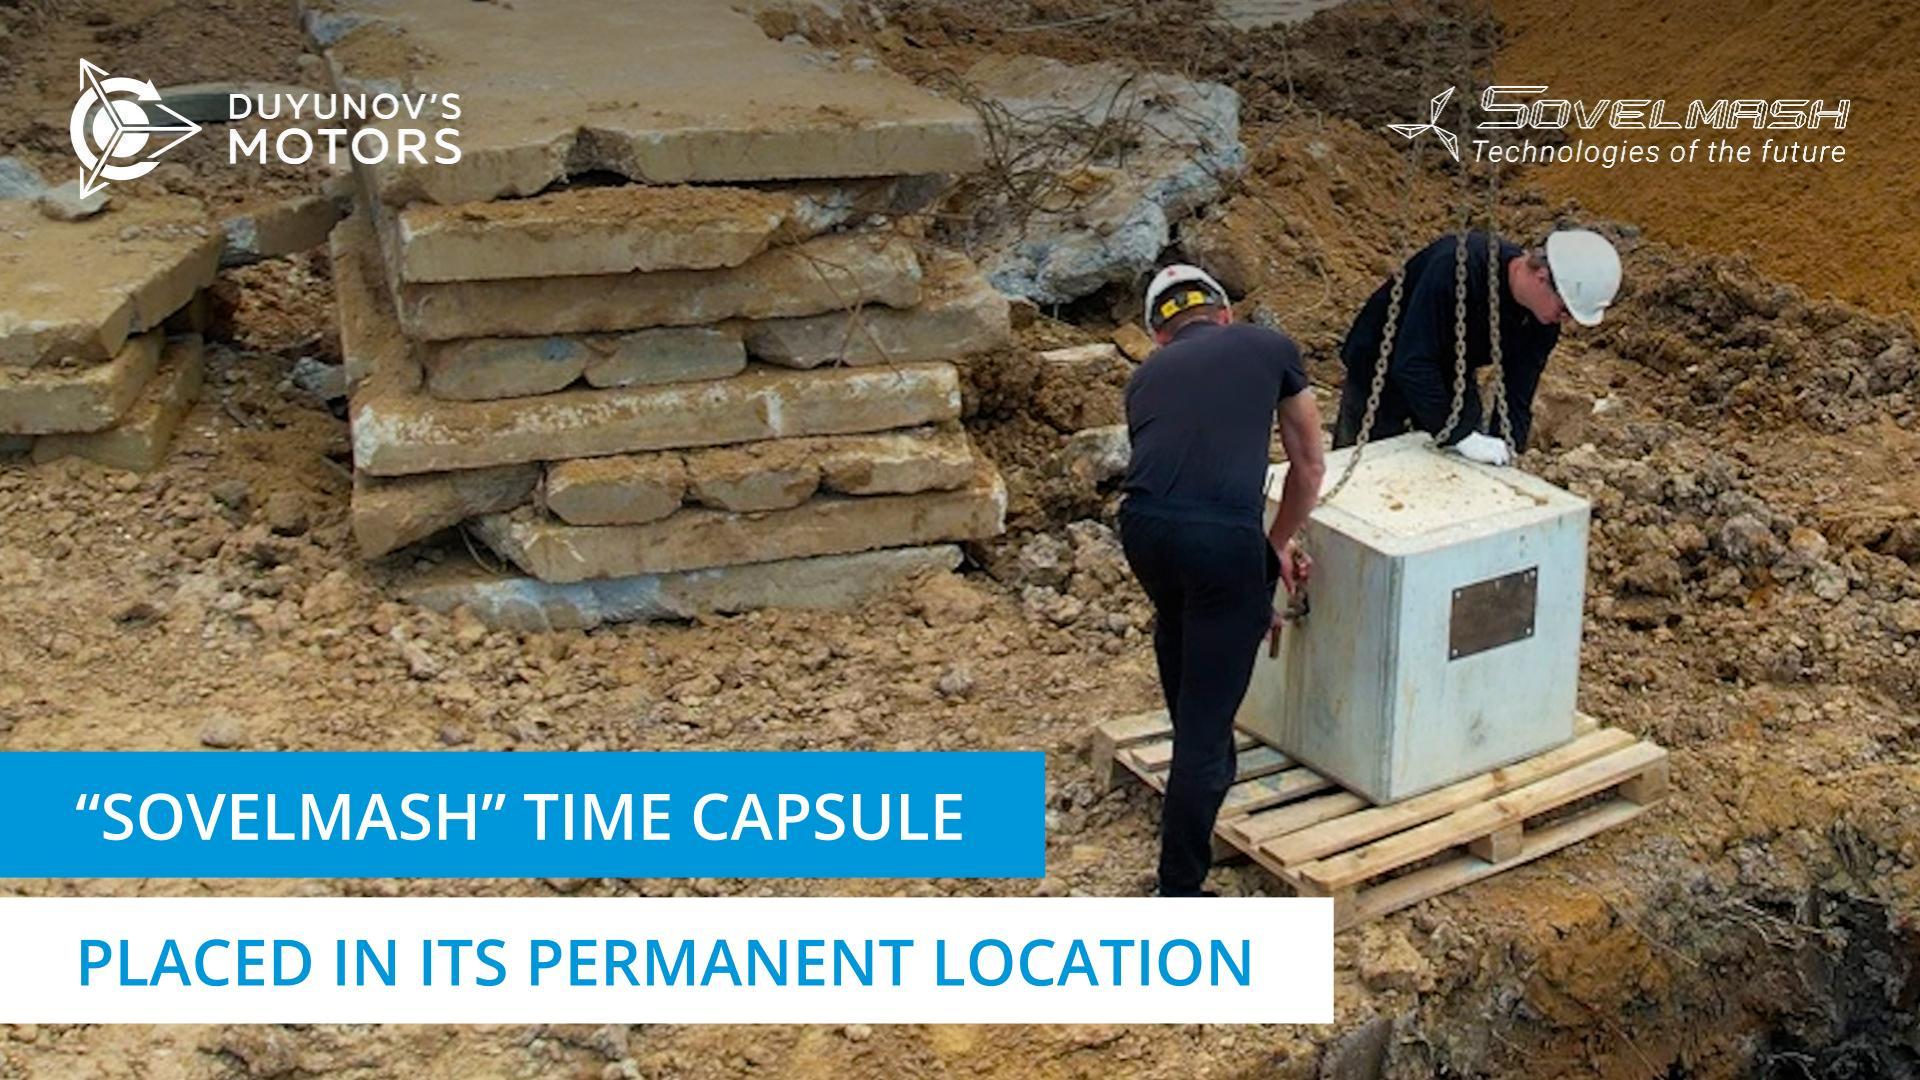 The "Sovelmash" time capsule is placed in its permanent location